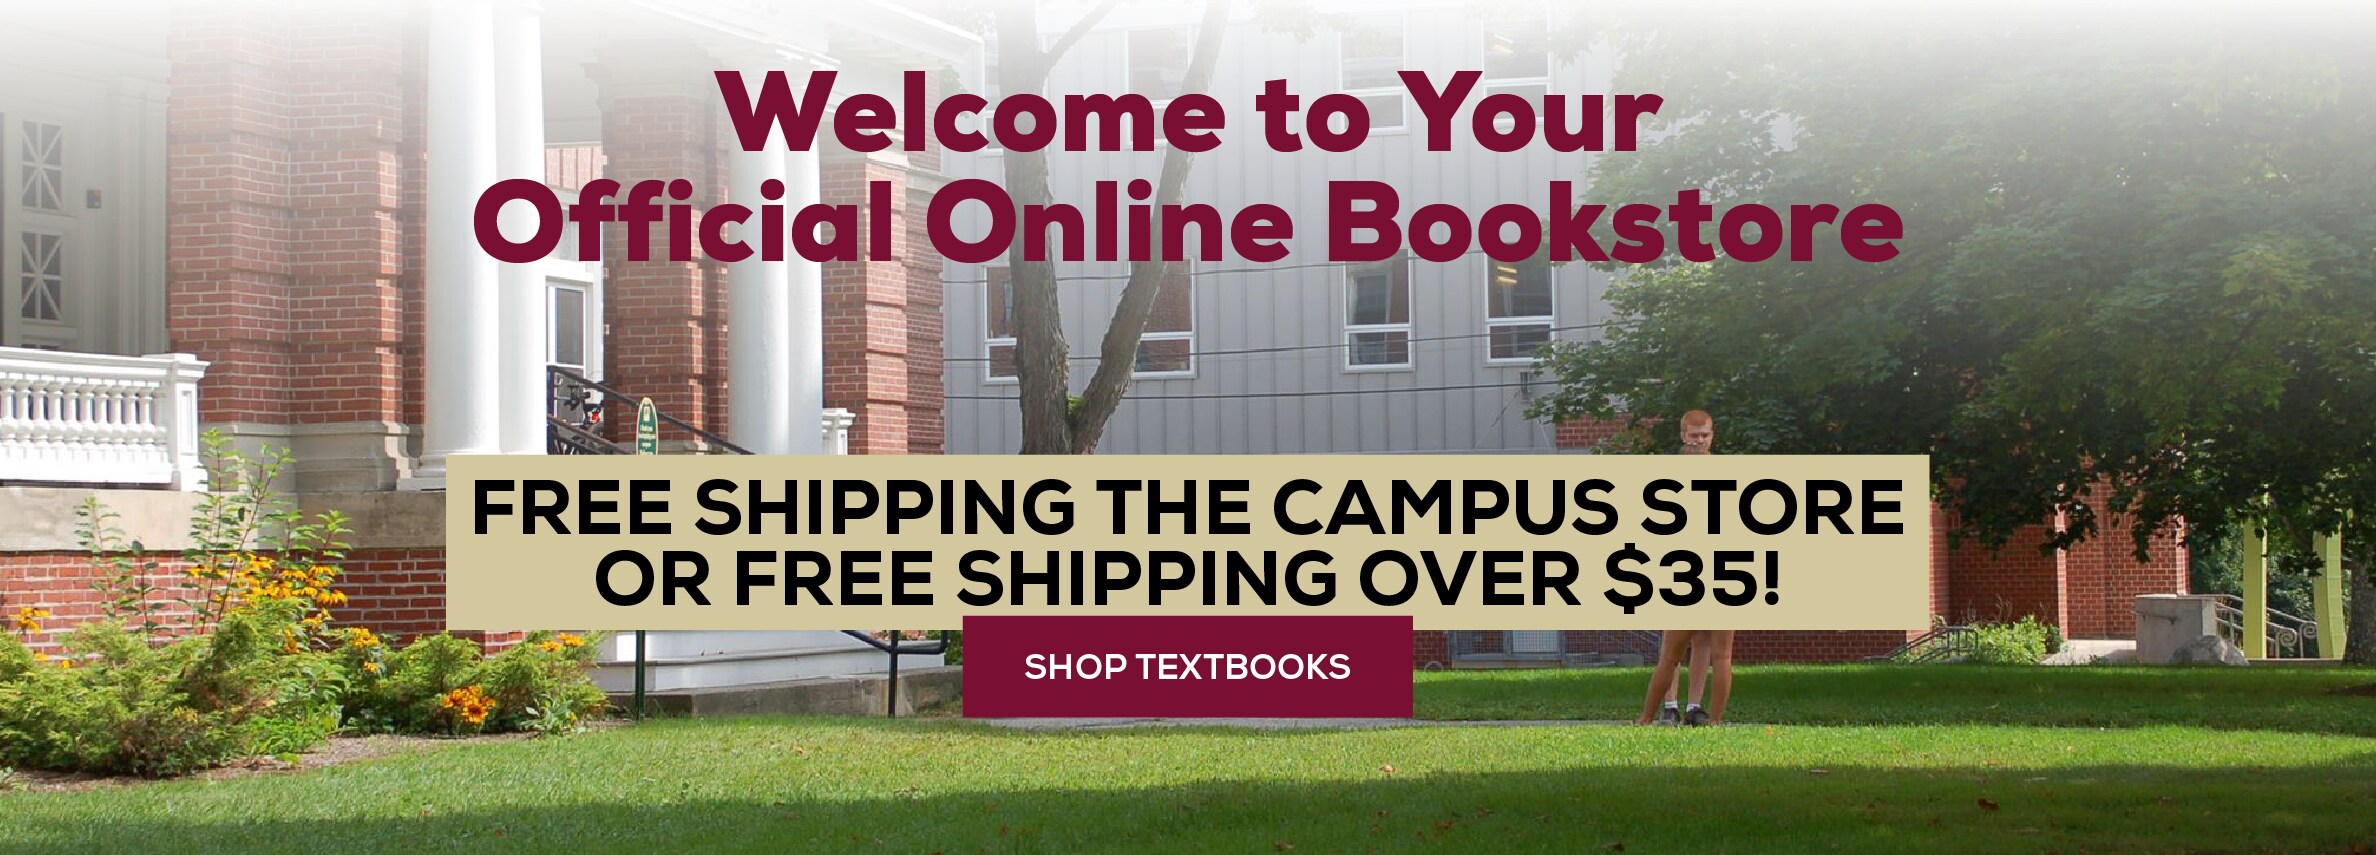 Welcome to your official online bookstore! free shipping the campus store or free shipping over $35! Shop textbooks